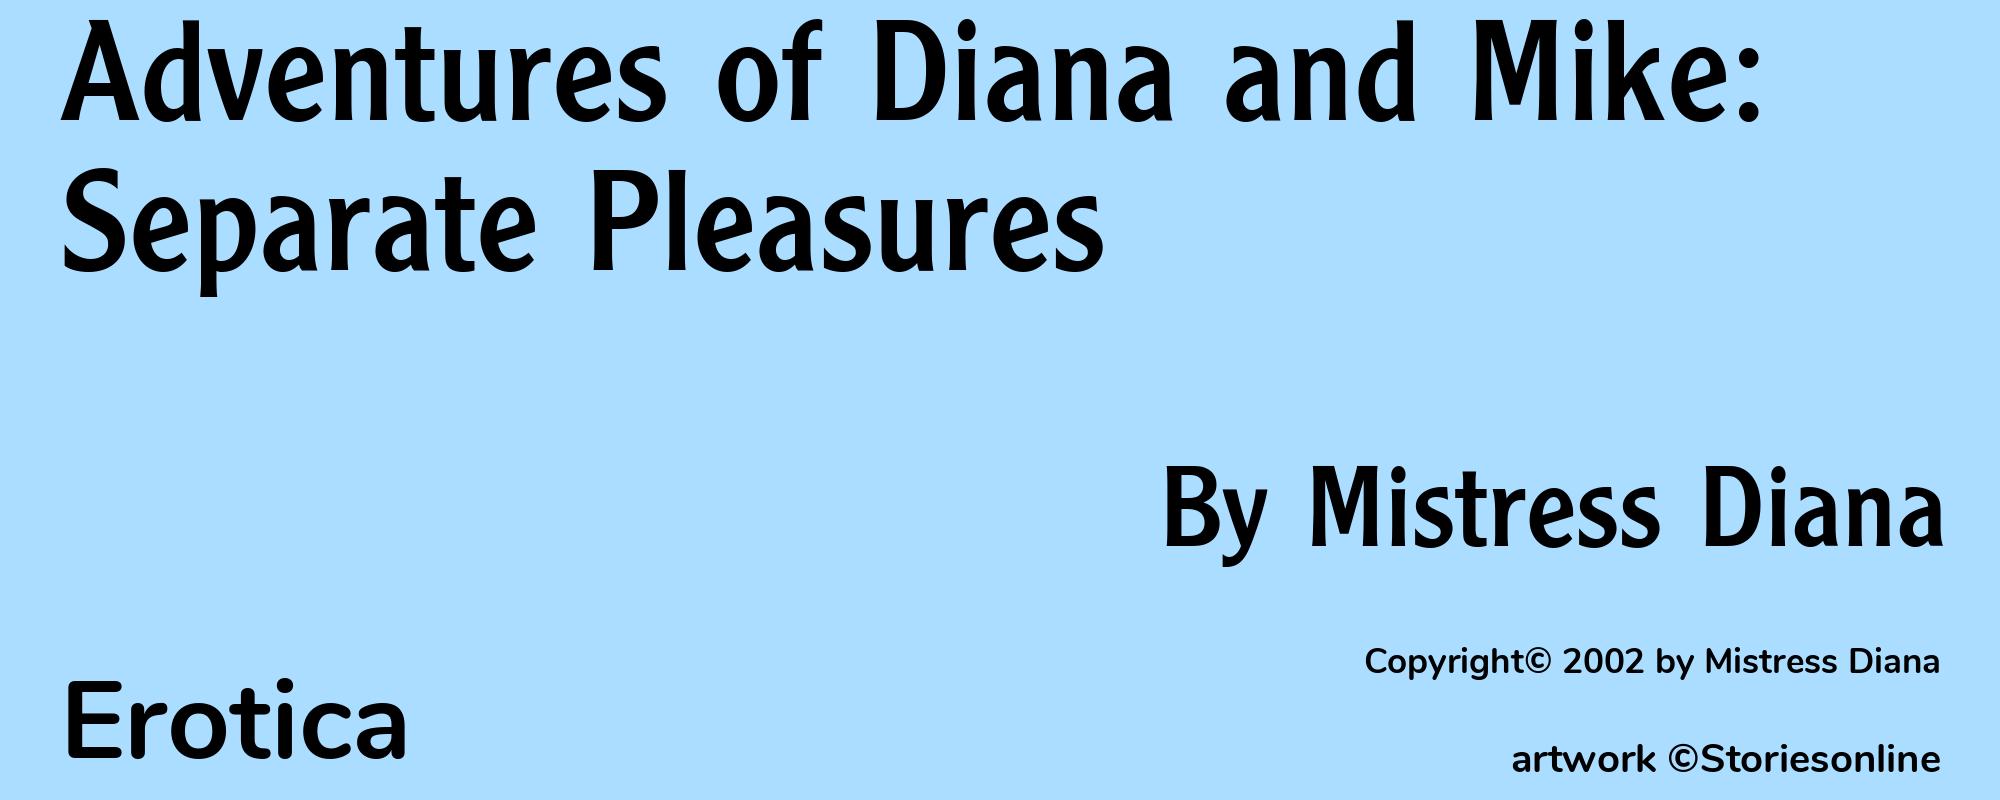 Adventures of Diana and Mike: Separate Pleasures - Cover